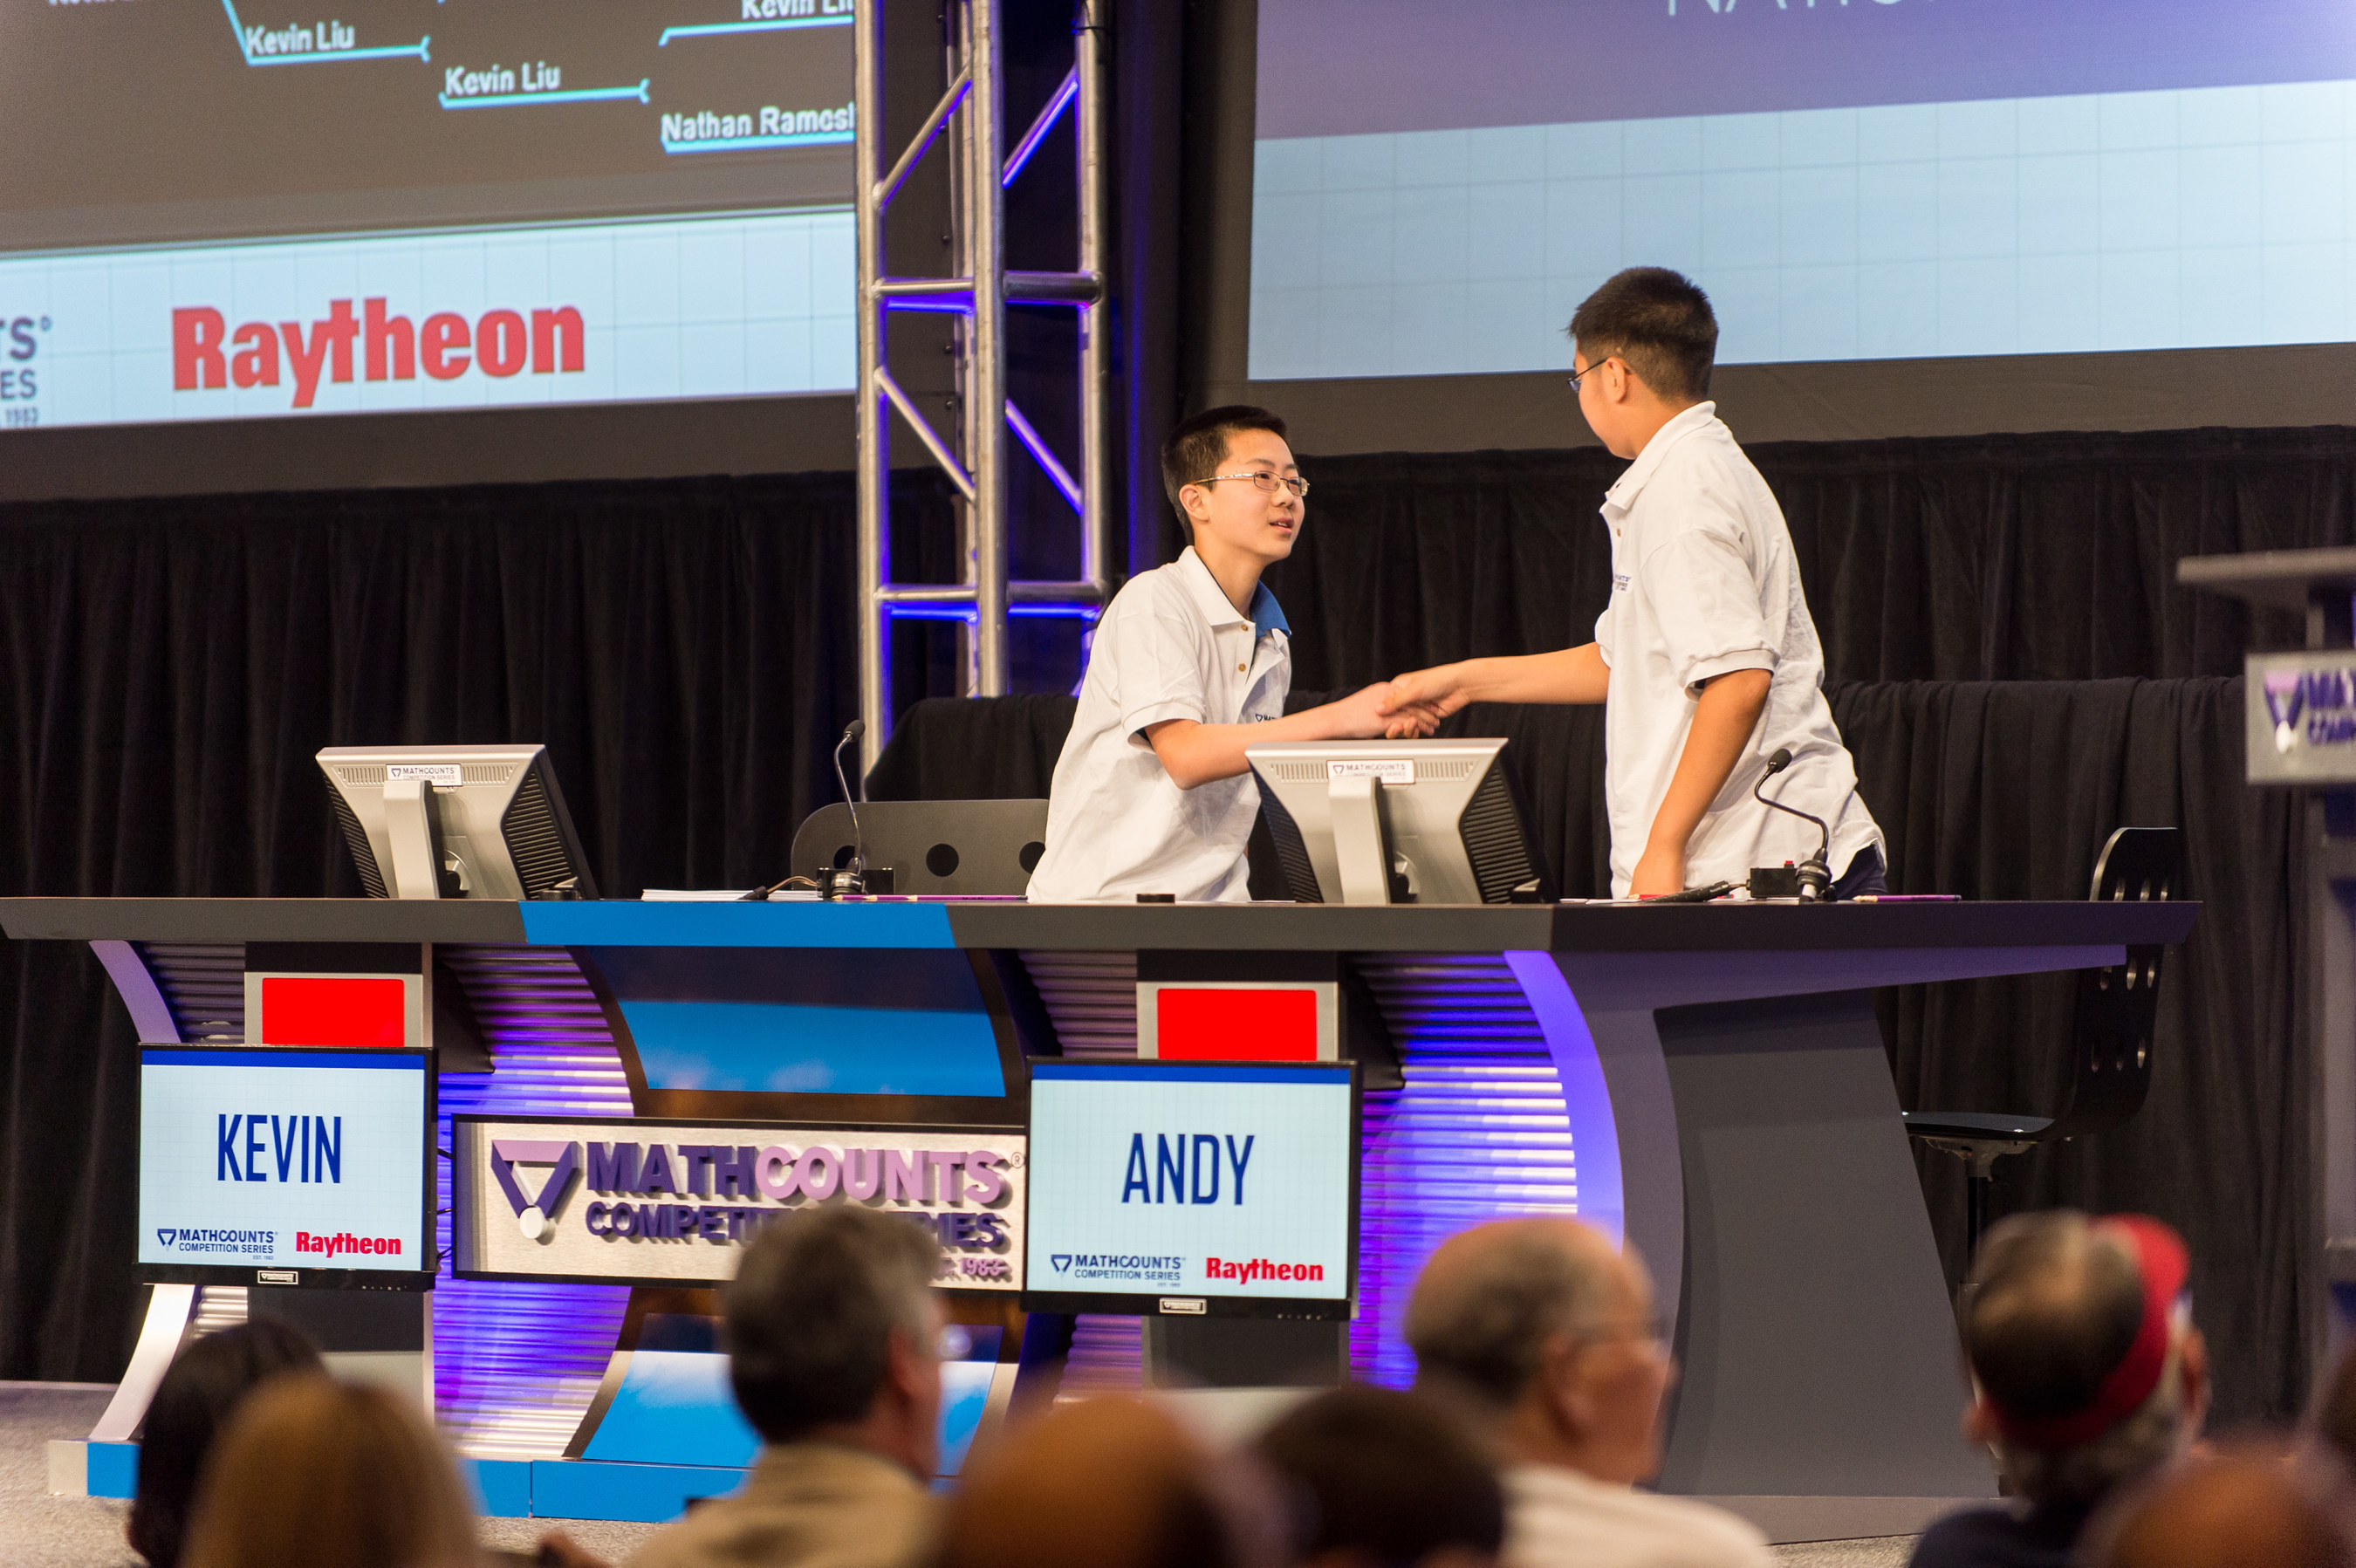 Kevin Liu, left, the 2015 Raytheon MATHCOUNTS National Champion, shakes the hand of runner-up Andy Xu after the final question of the Countdown Round at the Sheraton Boston Hotel. Liu, 14, of Carmel, Indiana, was among 224 U.S. middle-school math students who took part in this year's competition.